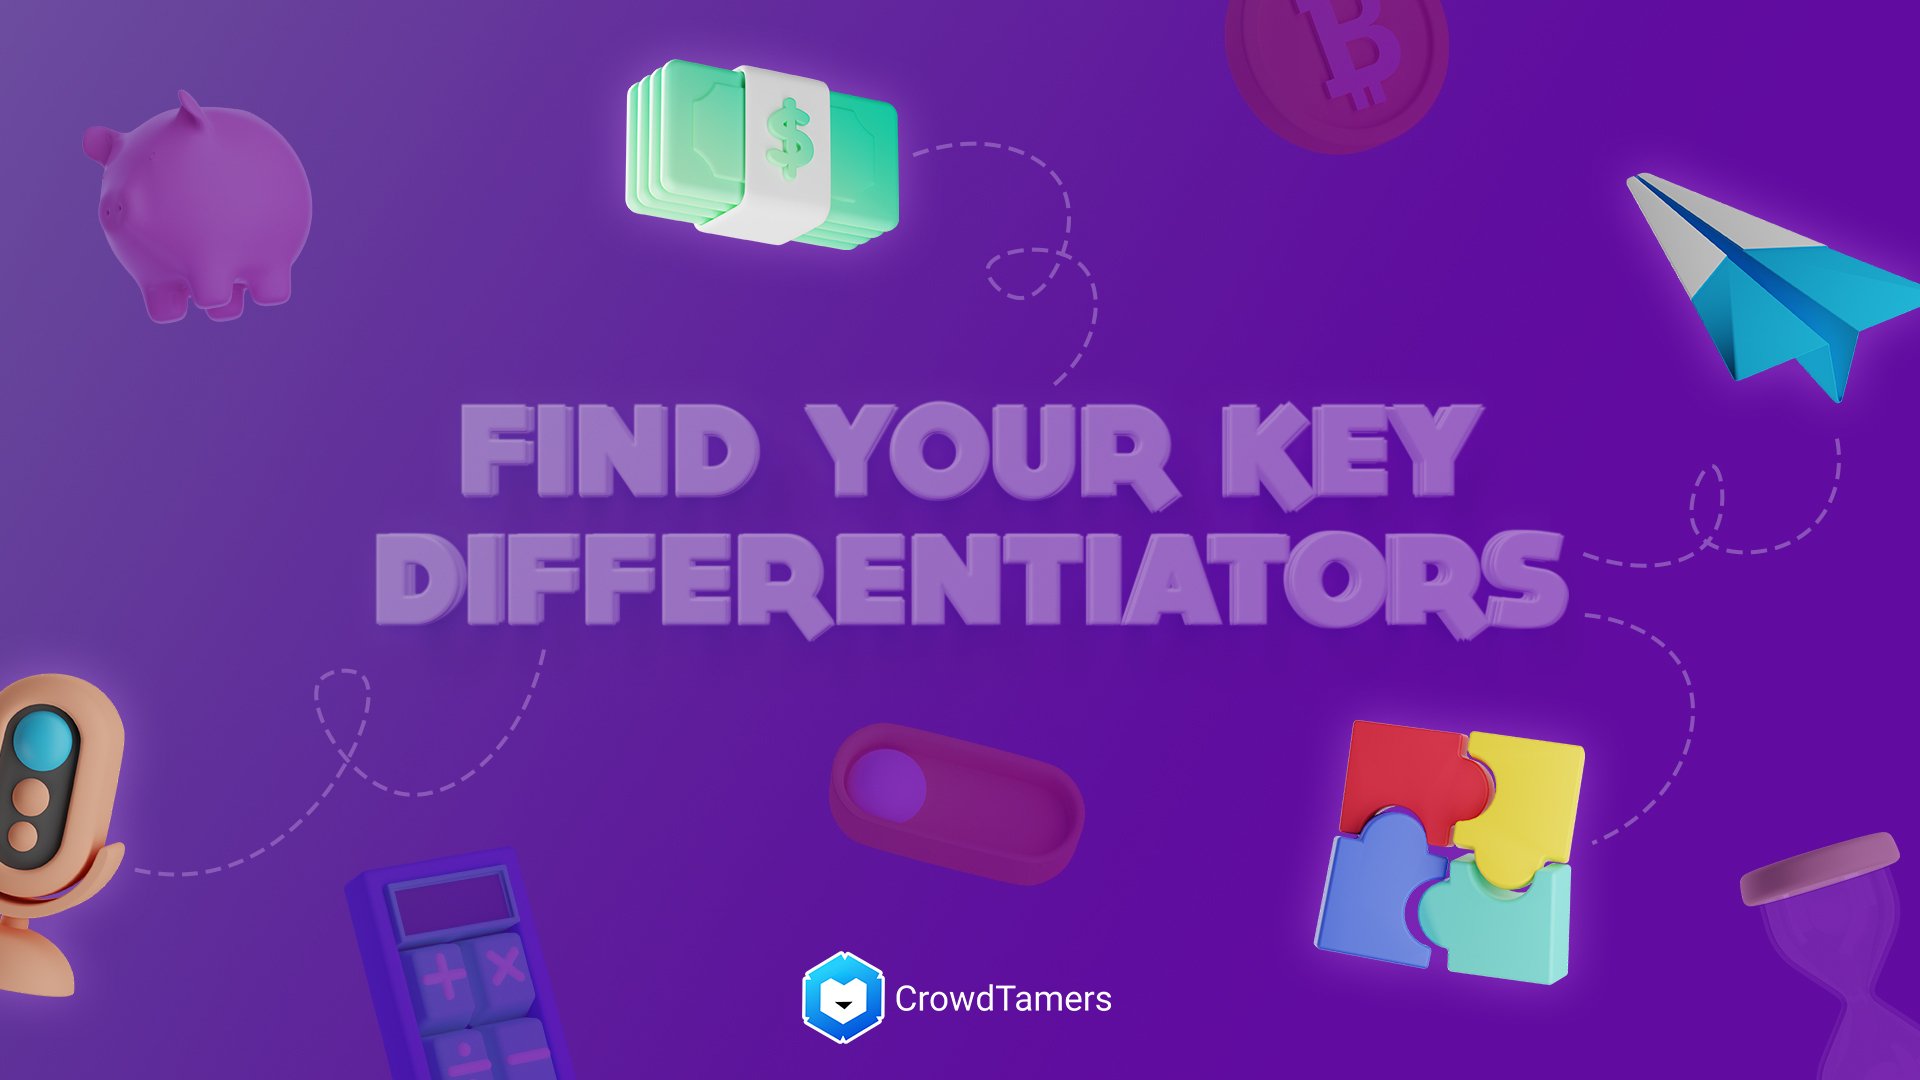 Find your key differentiator